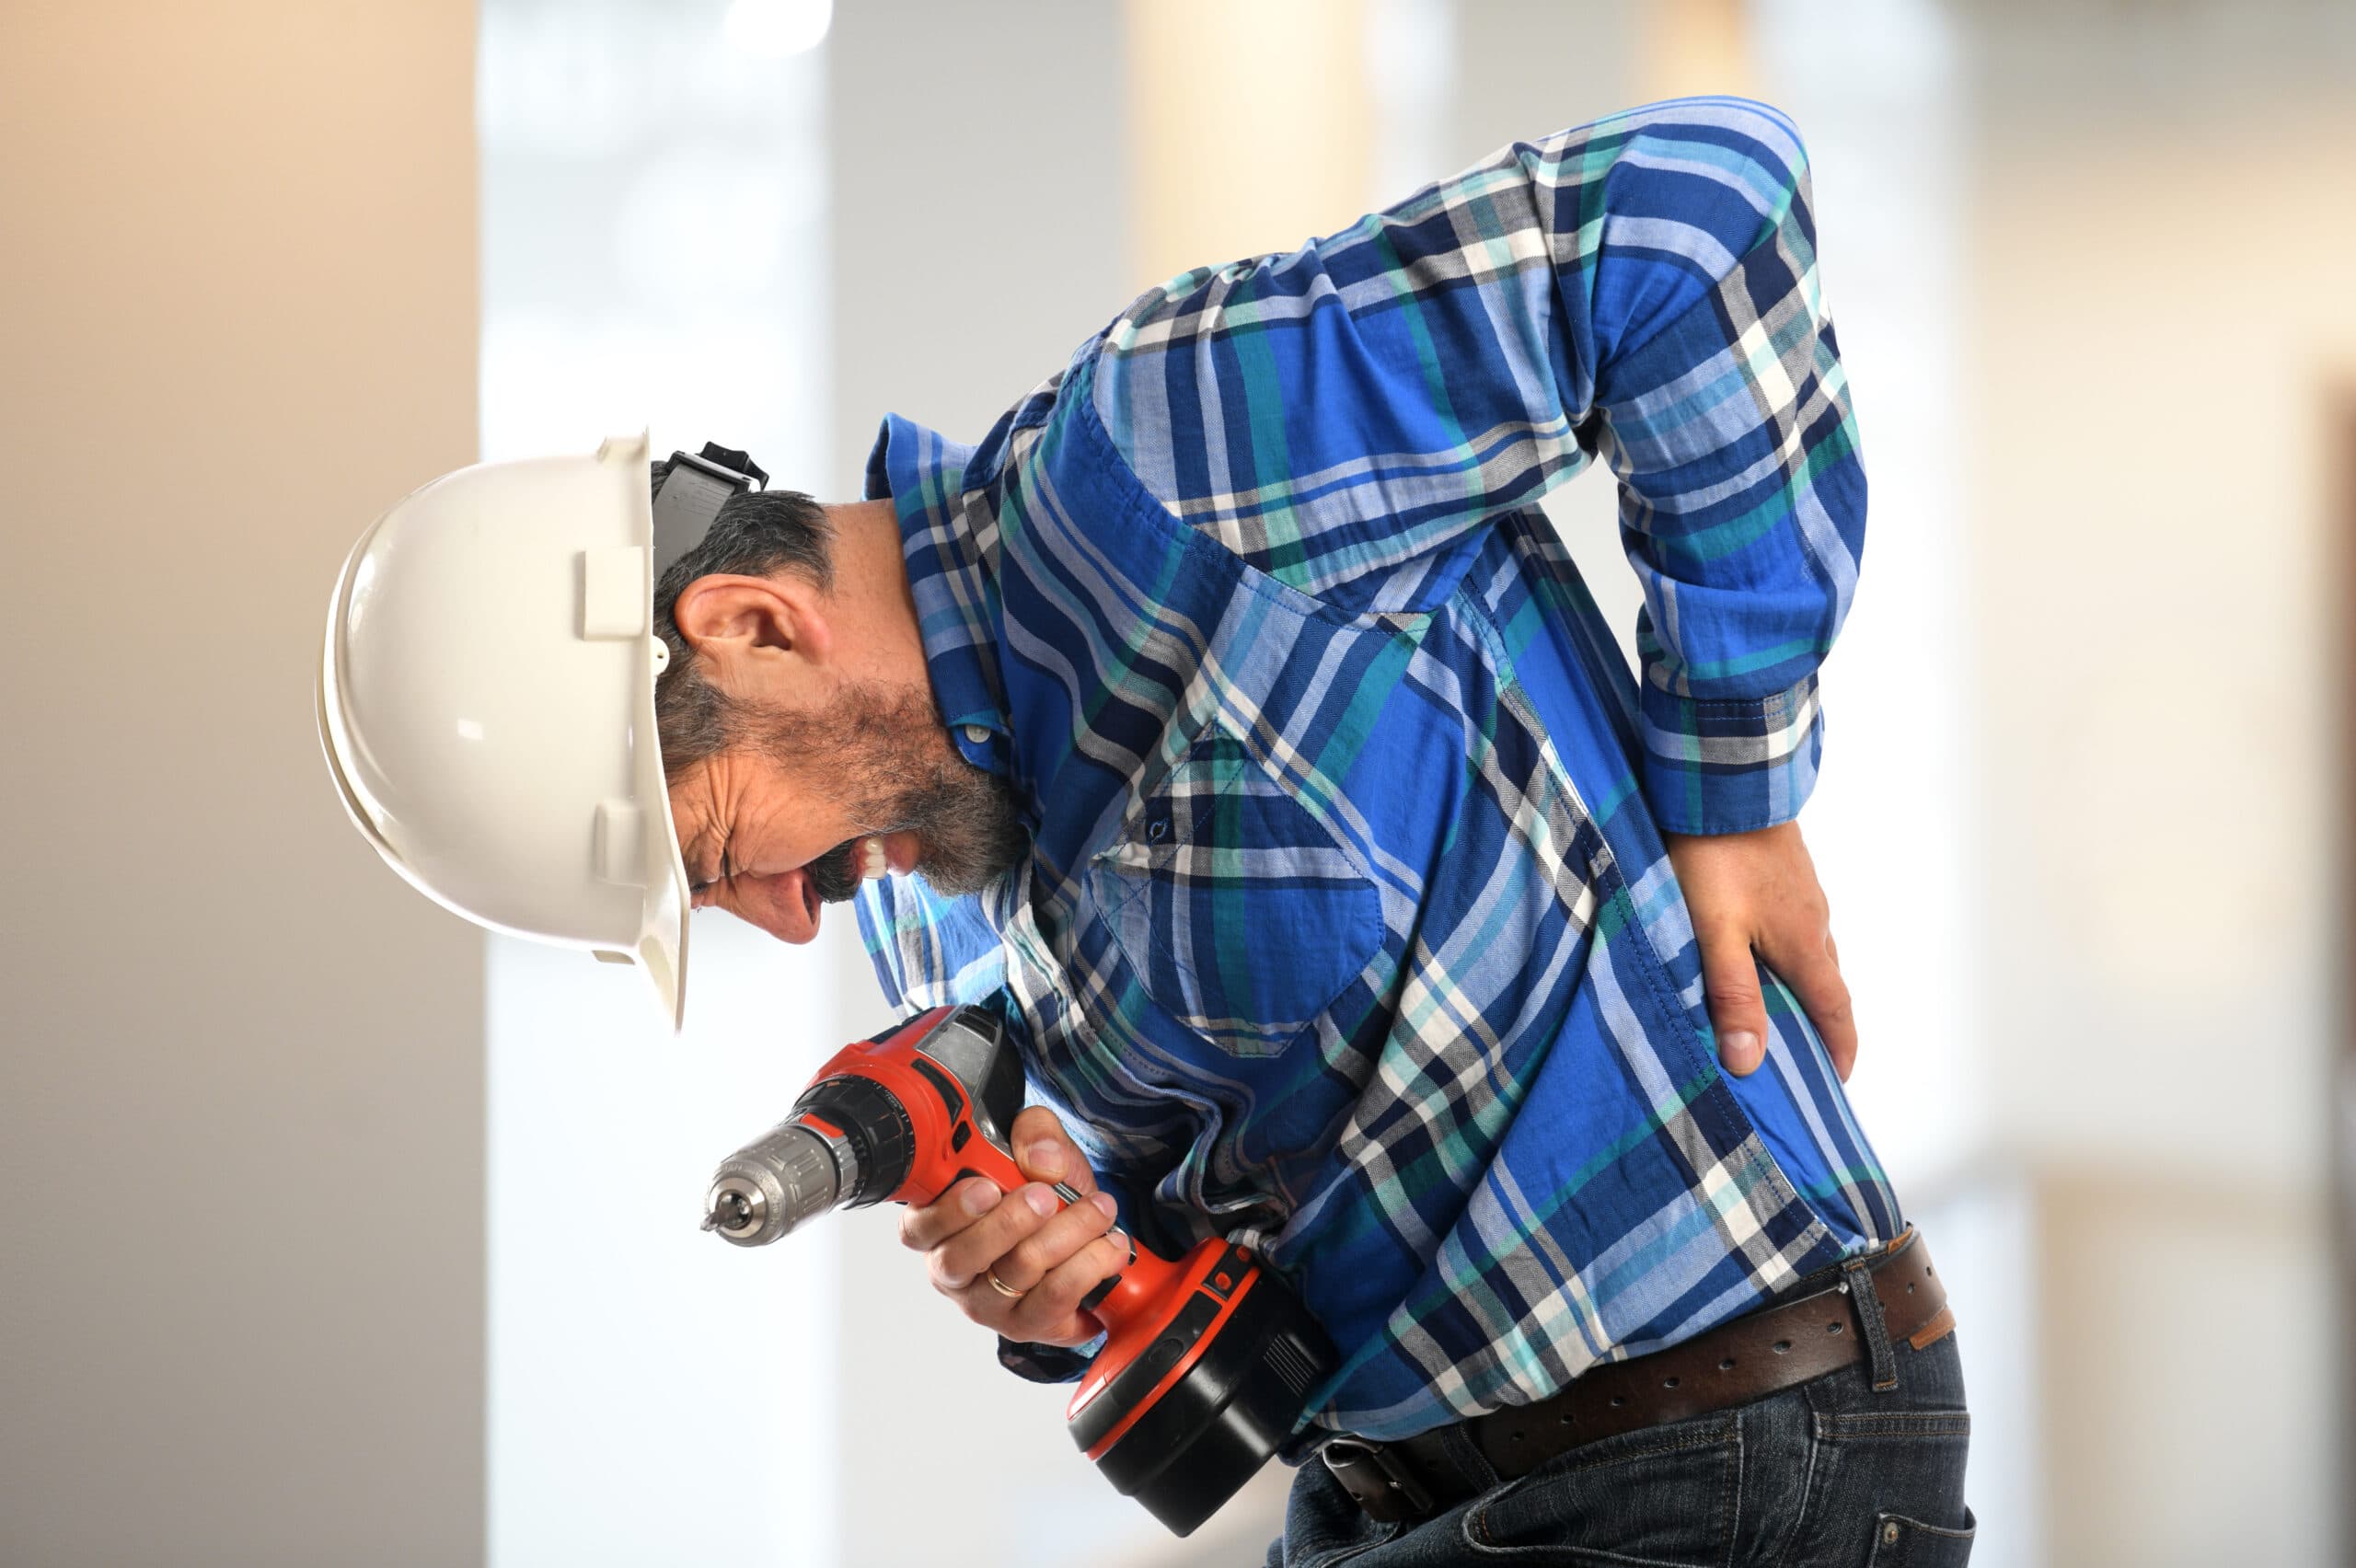 Tradie suffering from back pain holding onto lower back due to workplace personal injury